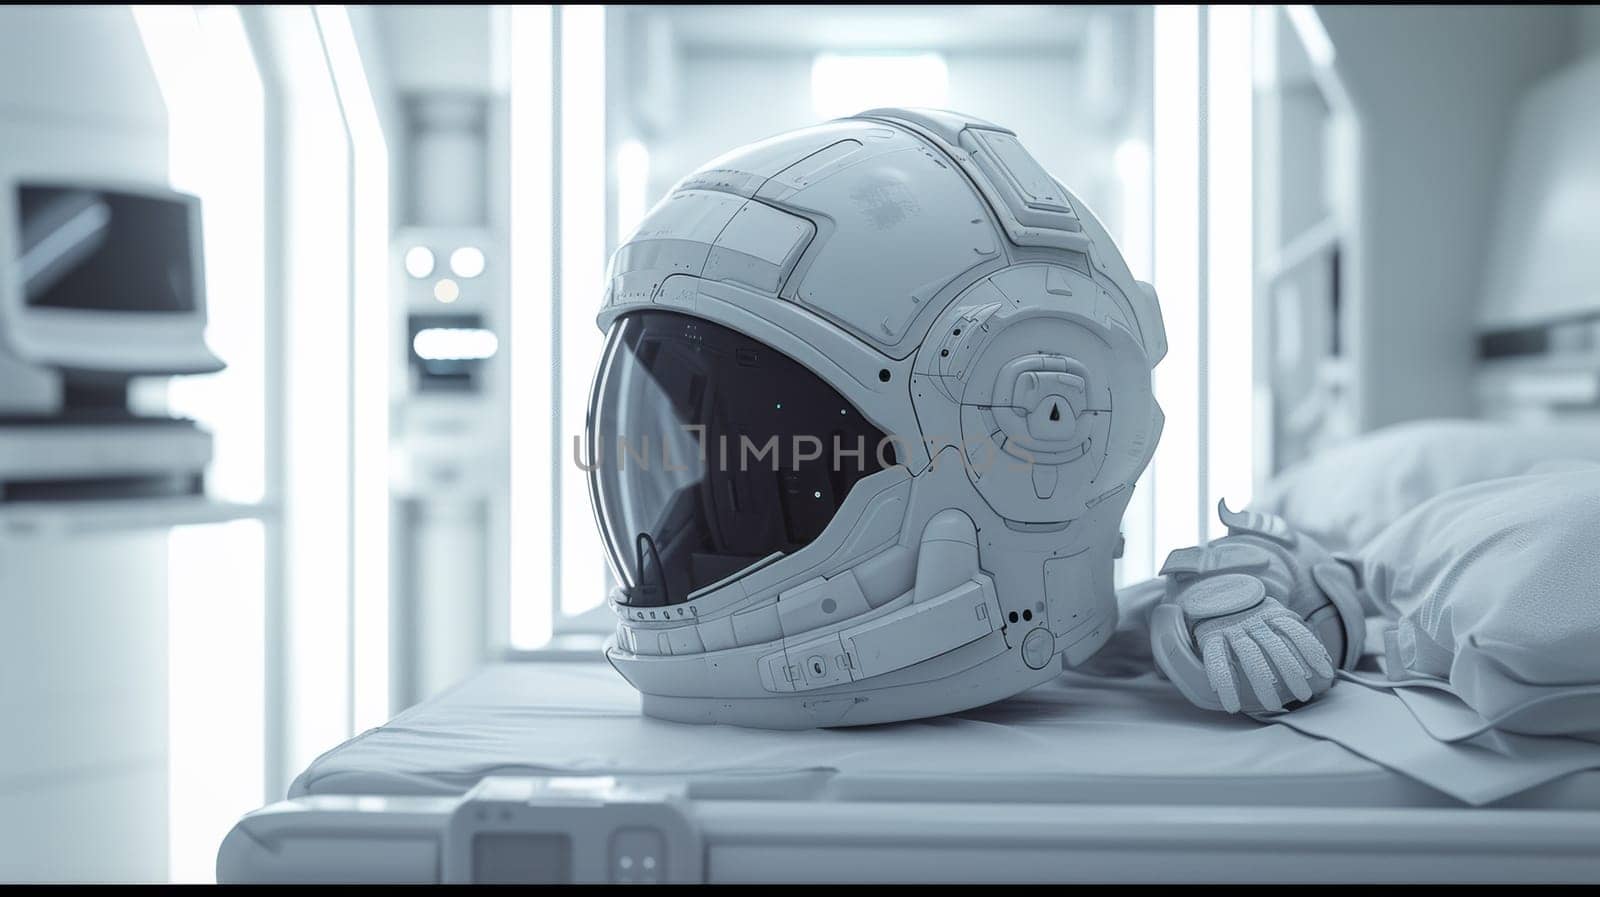 A white helmet on a bed in the hospital room